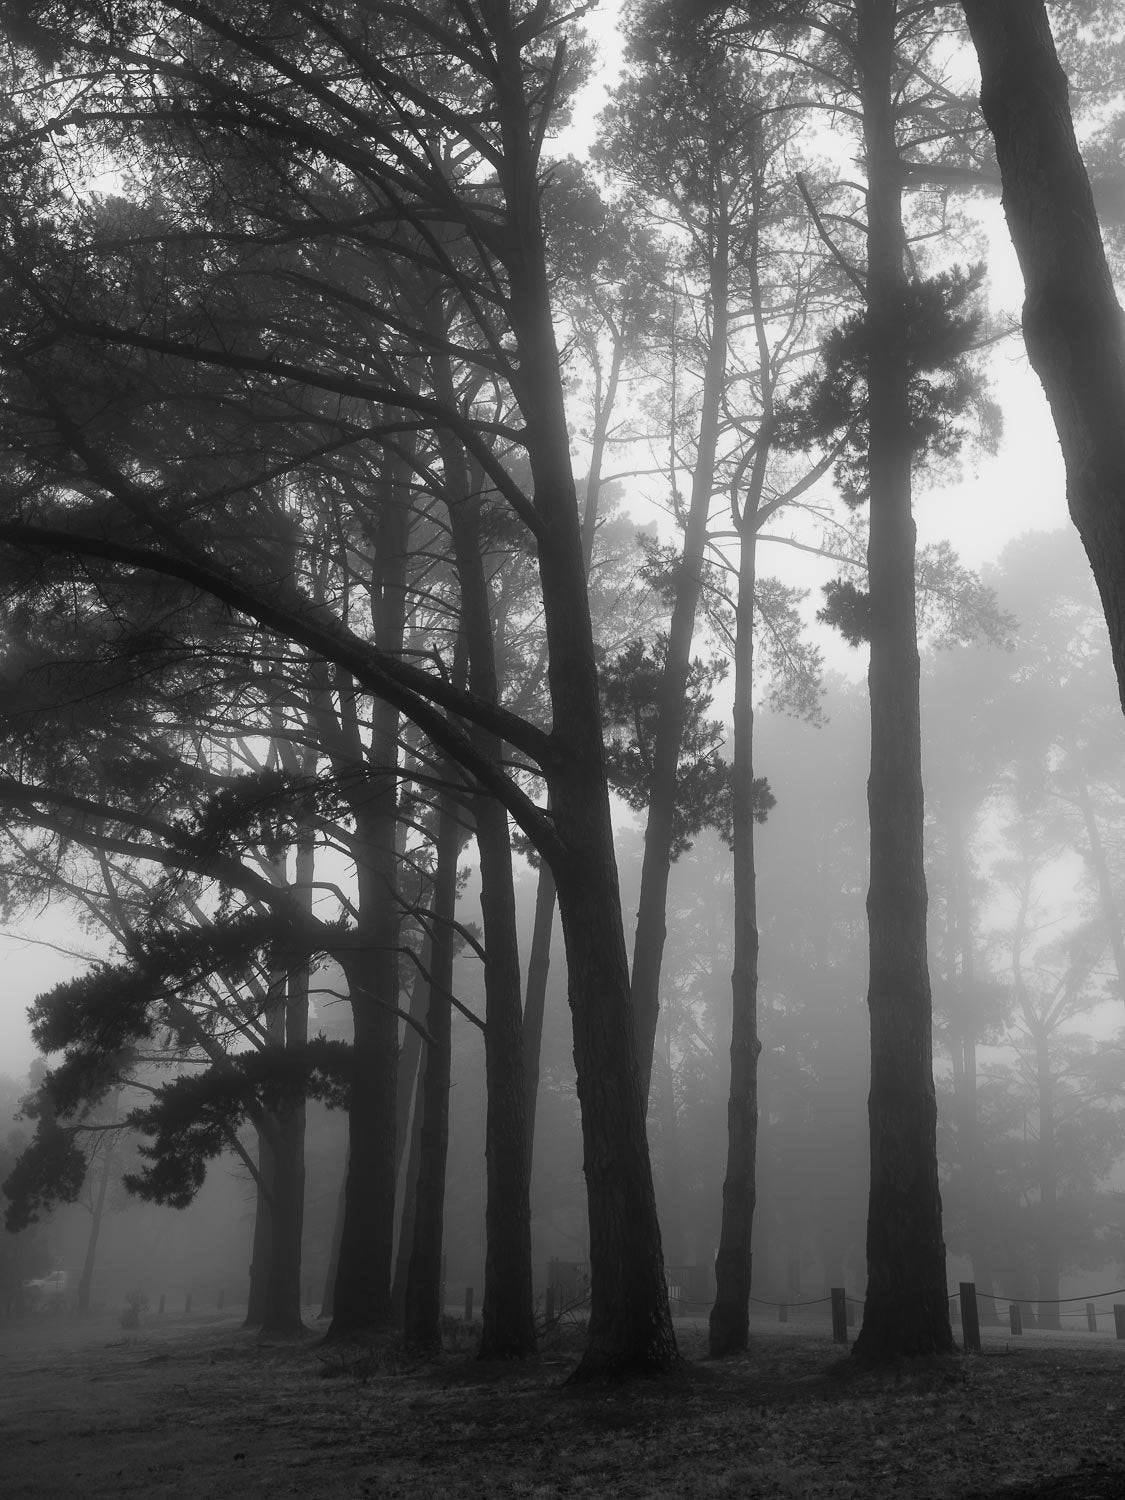 Long-standing palm trees in the forest with some foggy effect, Seawinds - Mornington Peninsula, VIC